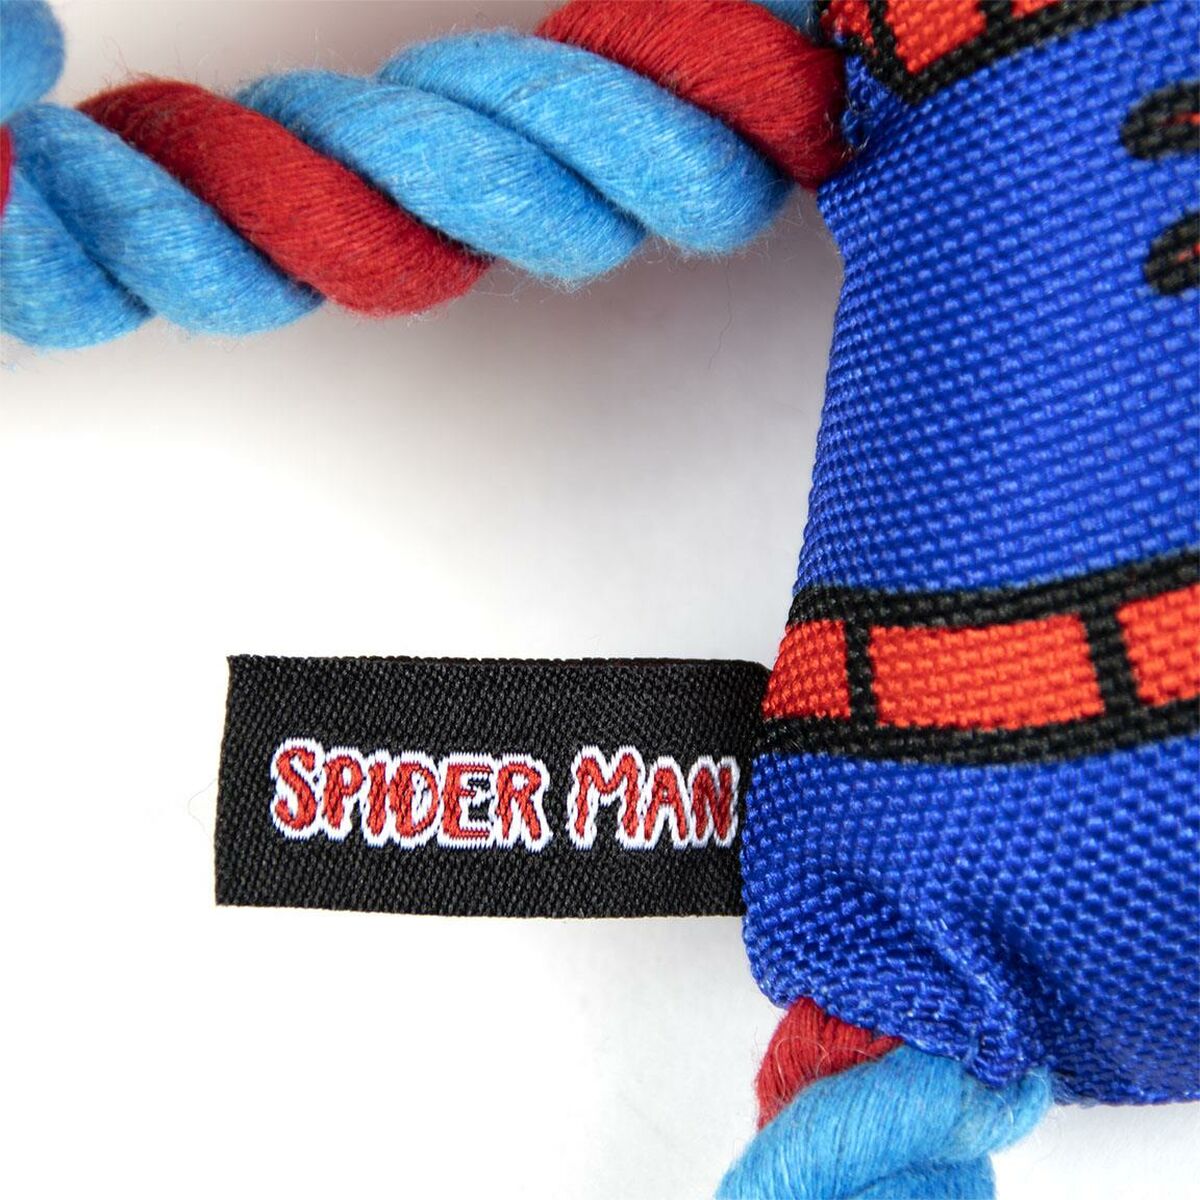 Rope Spiderman Red